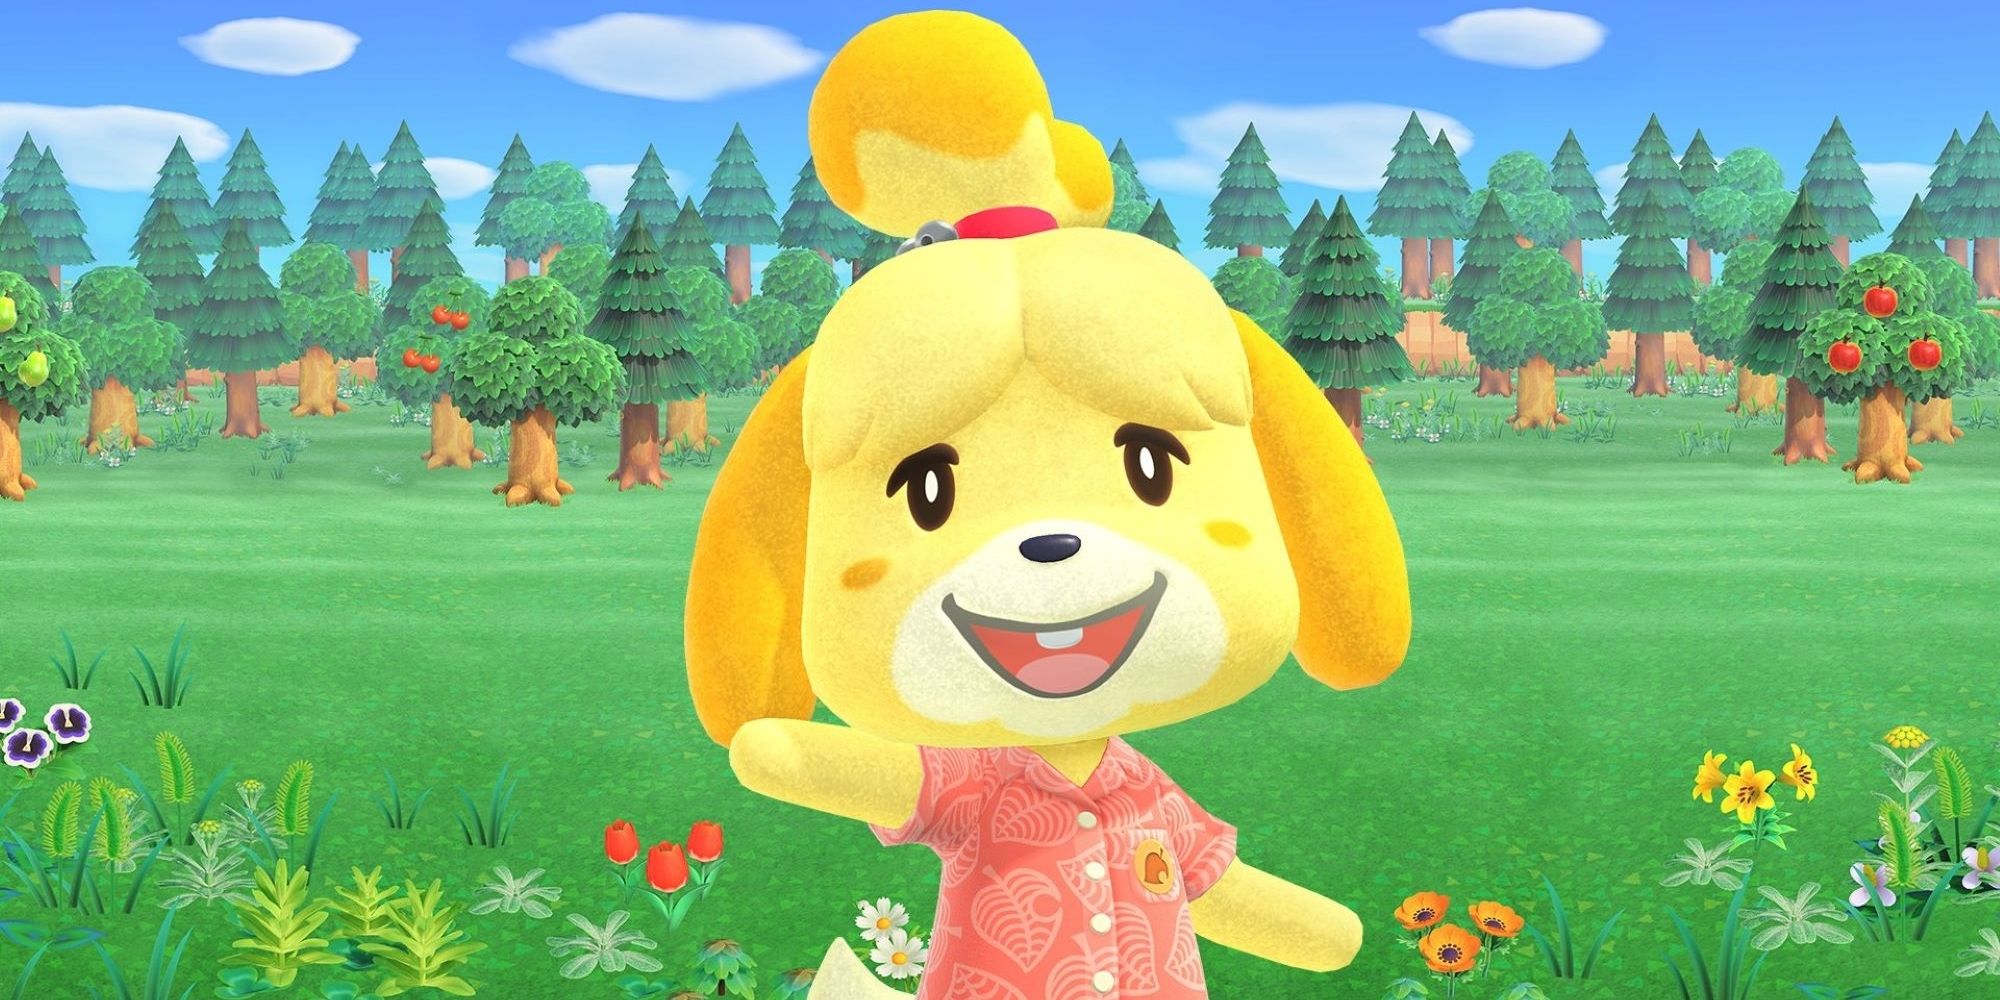 Isabelle from Animal Crossing: New Horizons against a forest backdrop.